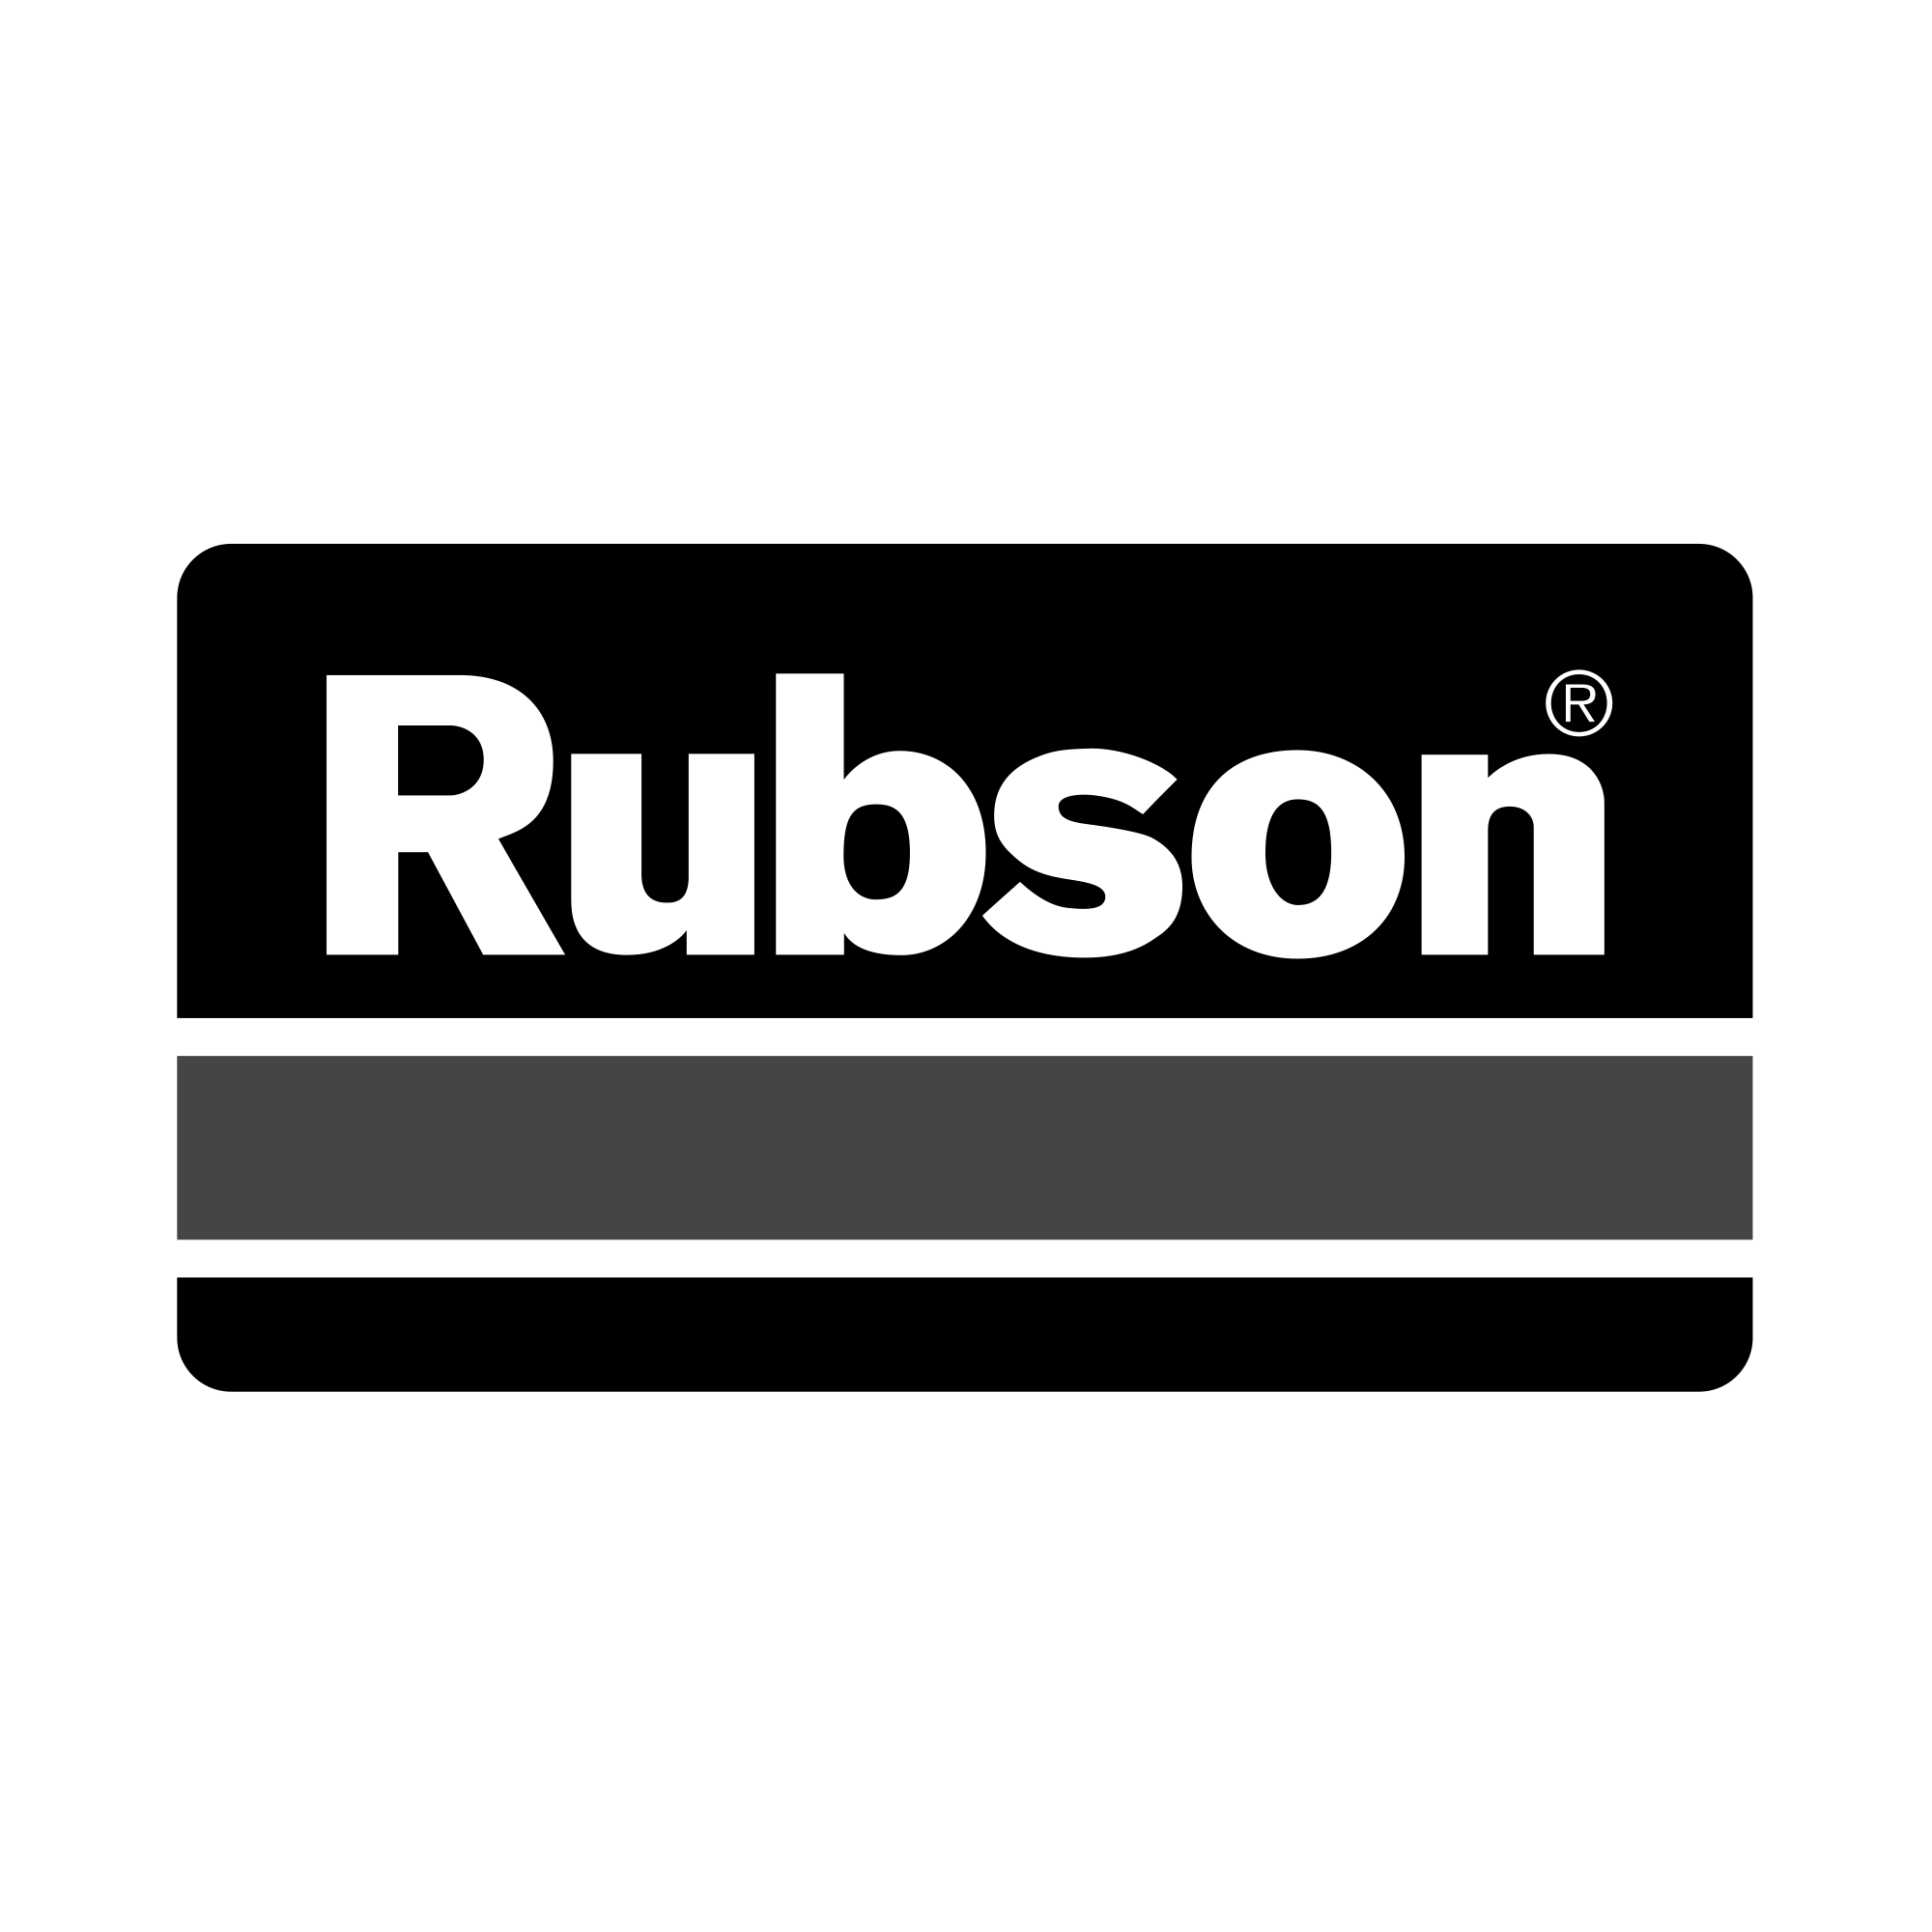 2000px-Rubson.png